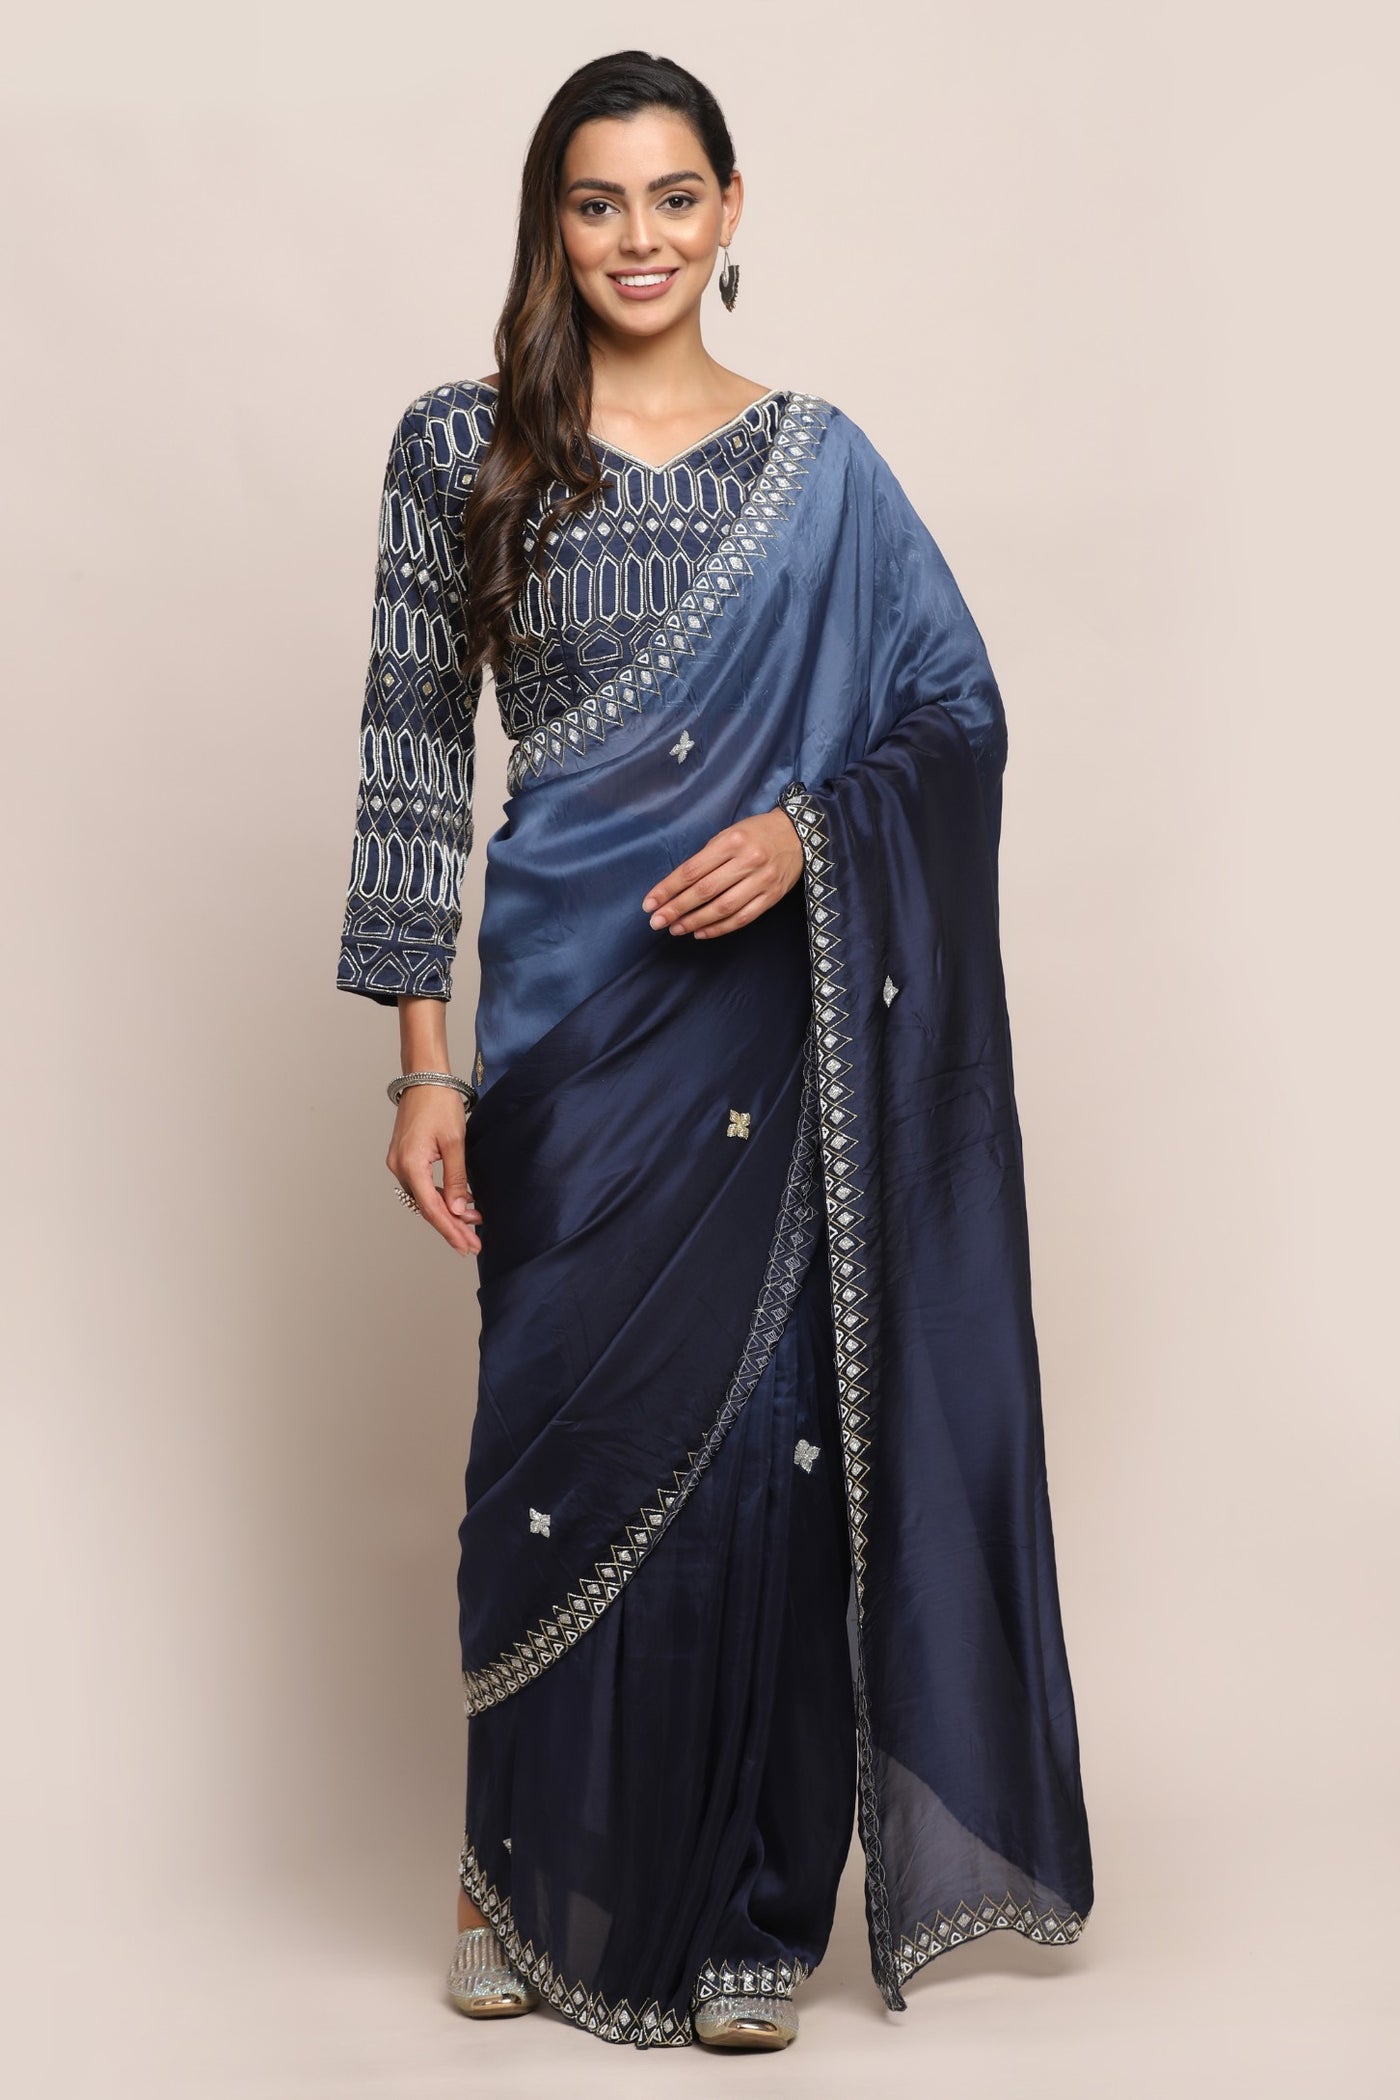 Classy royal blue shaded embroidered saree